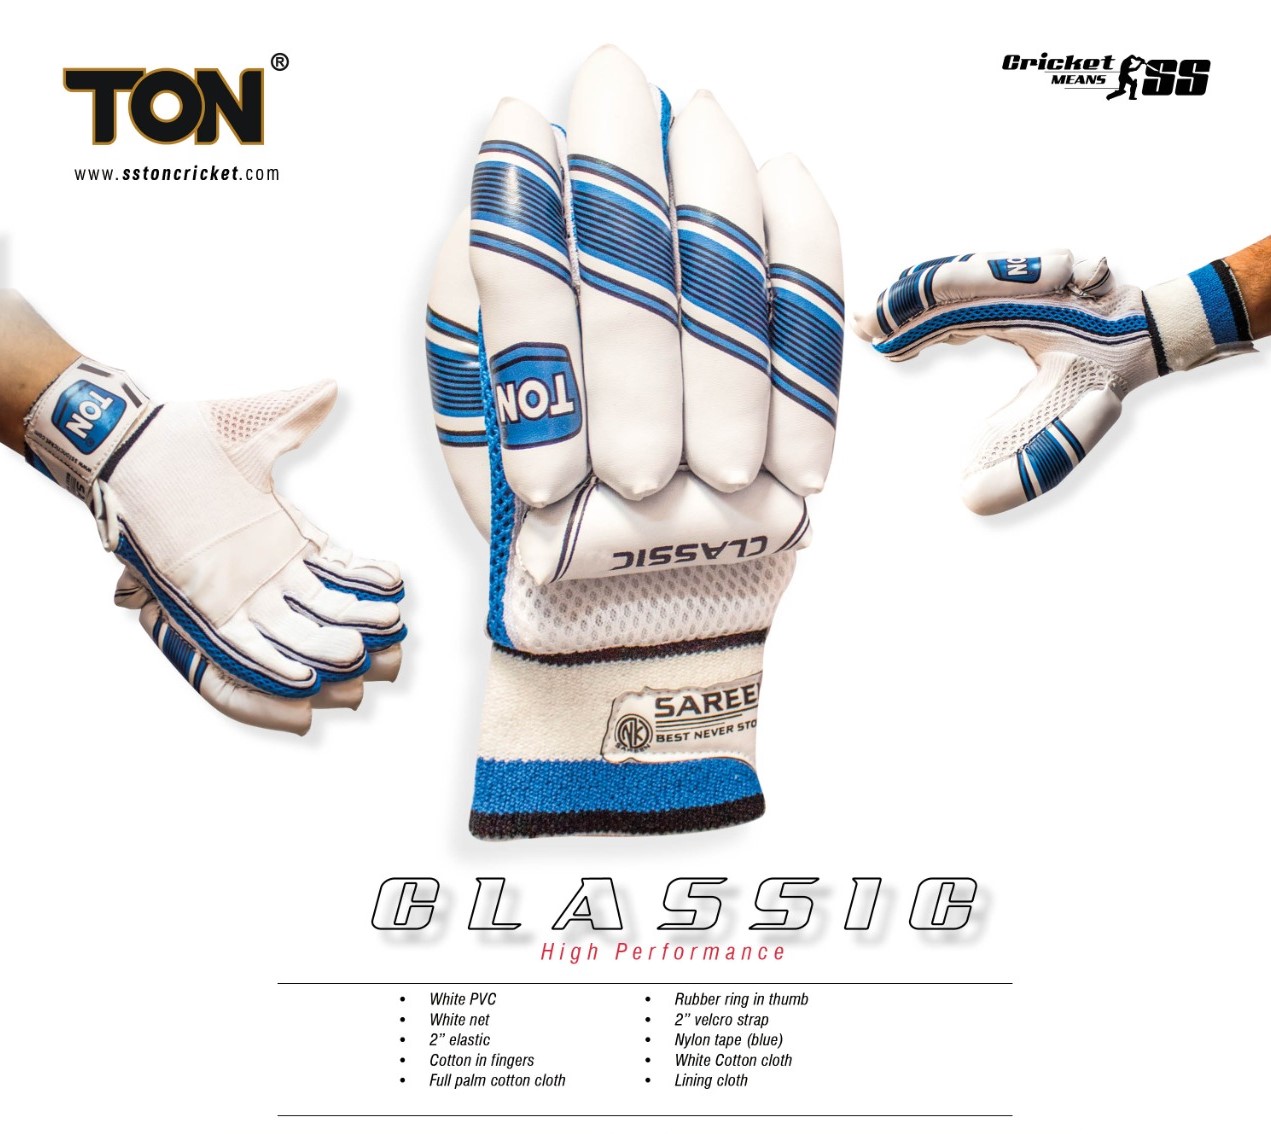 SS Ton Classic Batting Gloves Features